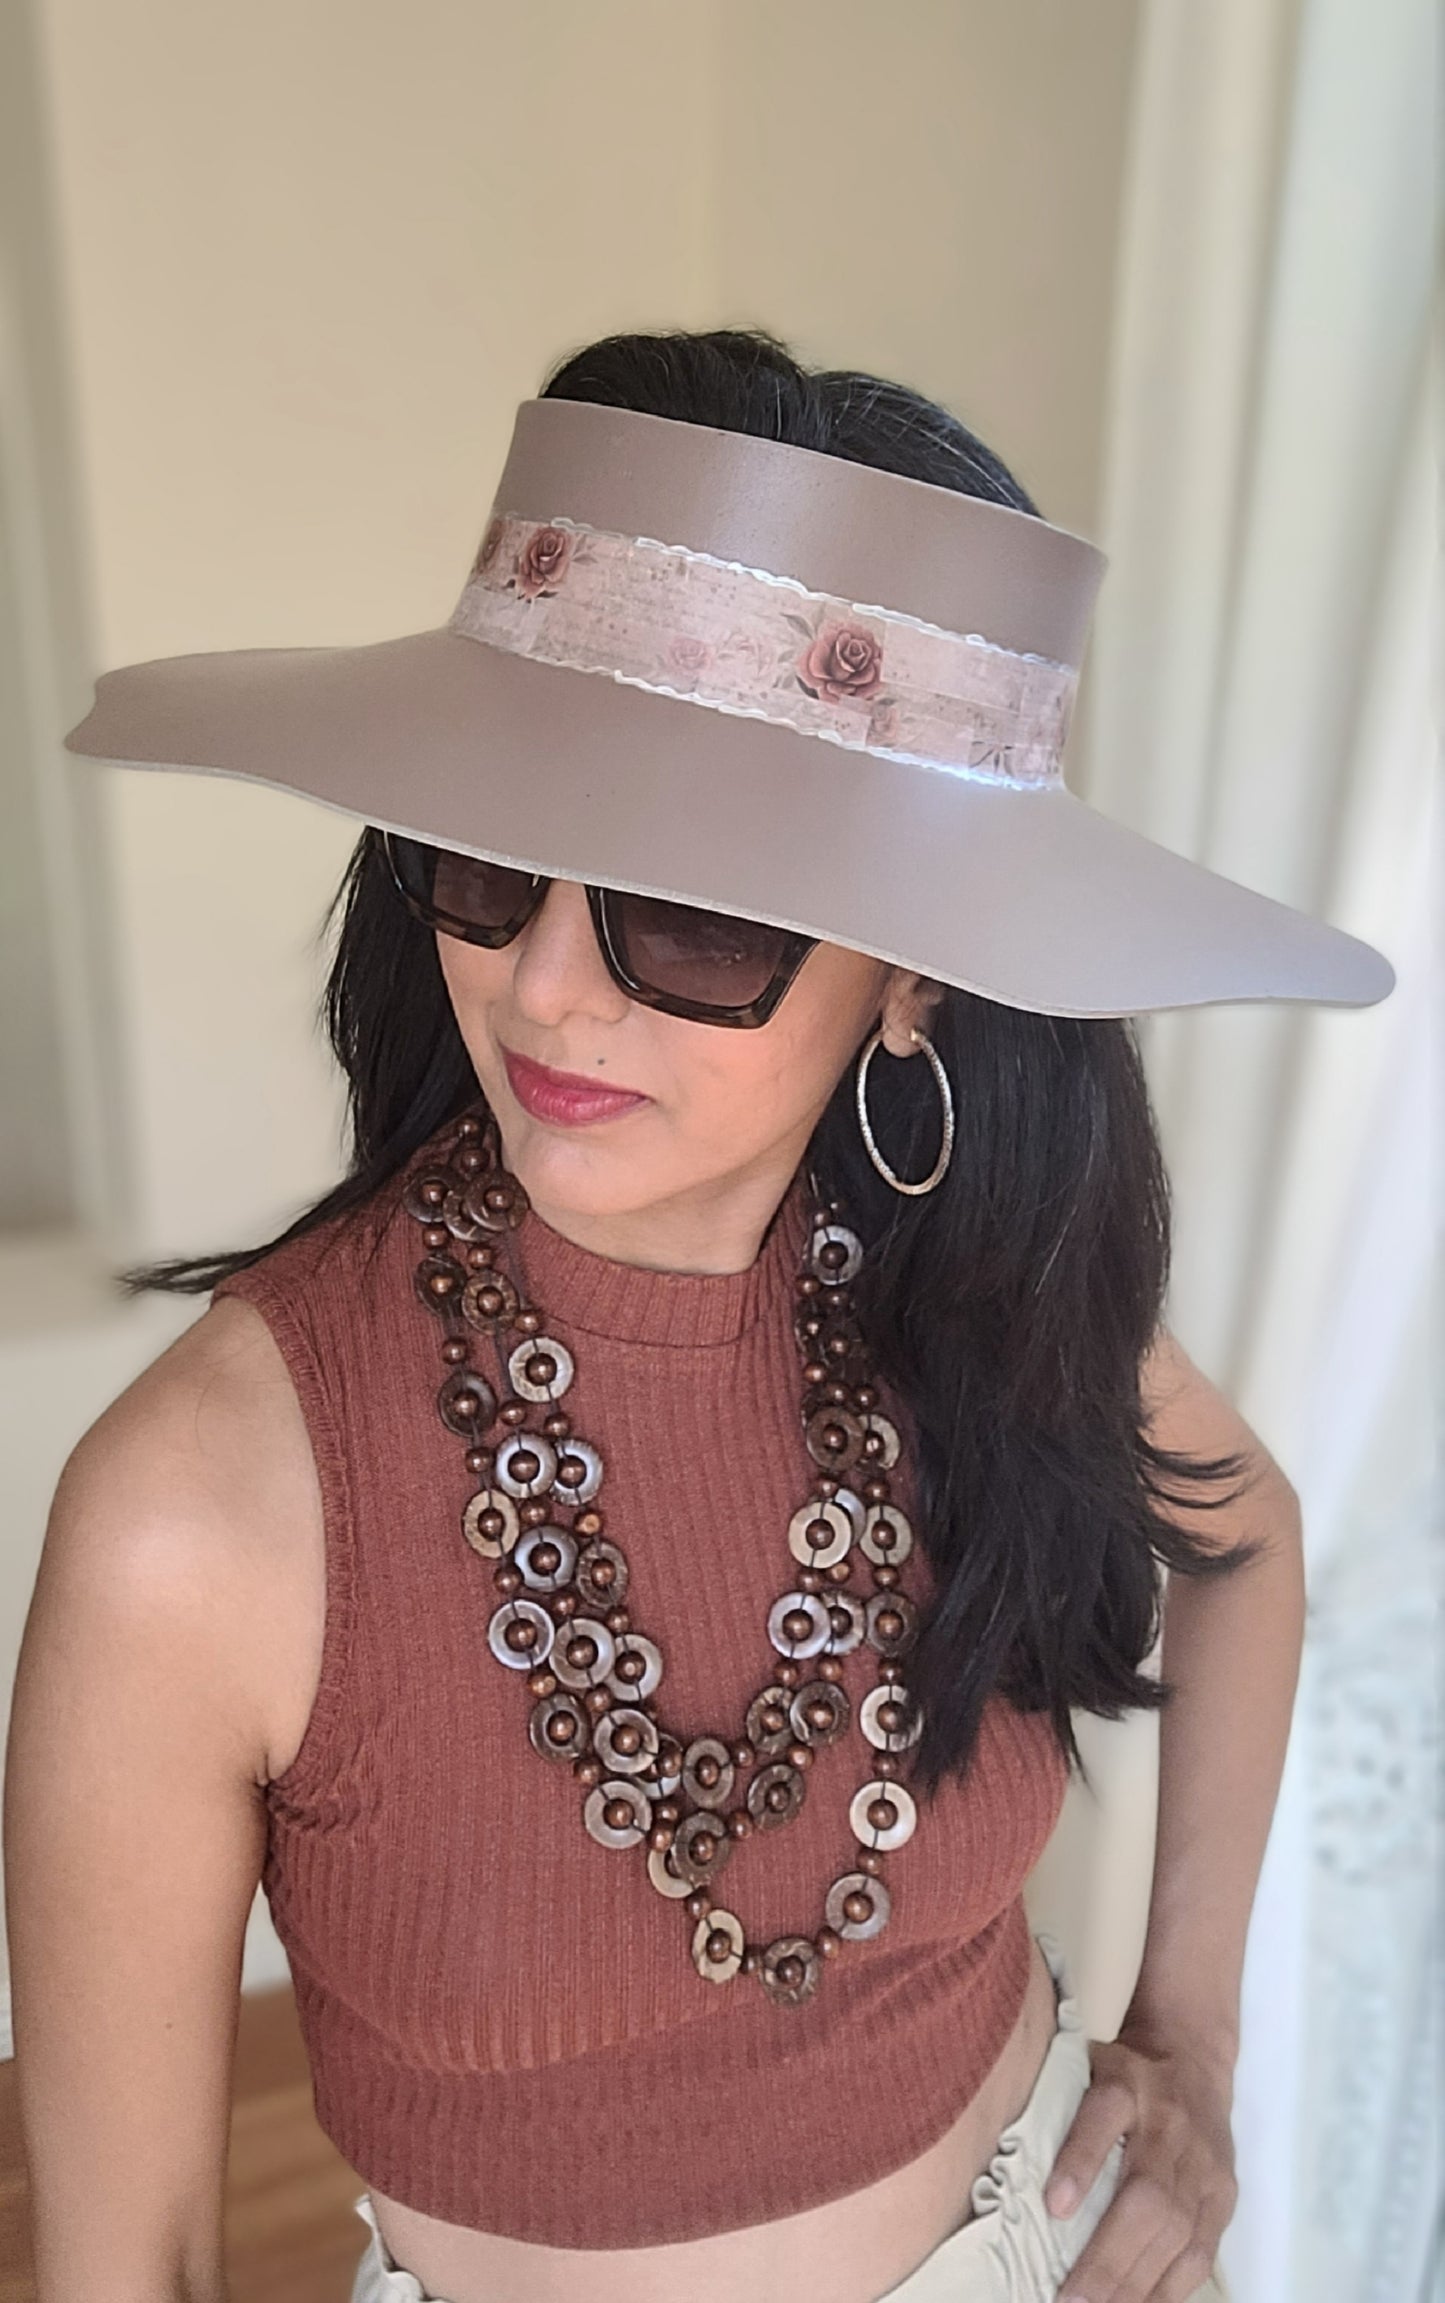 Elegant Darker Taupe Lotus Sun Visor Hat with Classy Burgundy Floral Band and Silver Accents